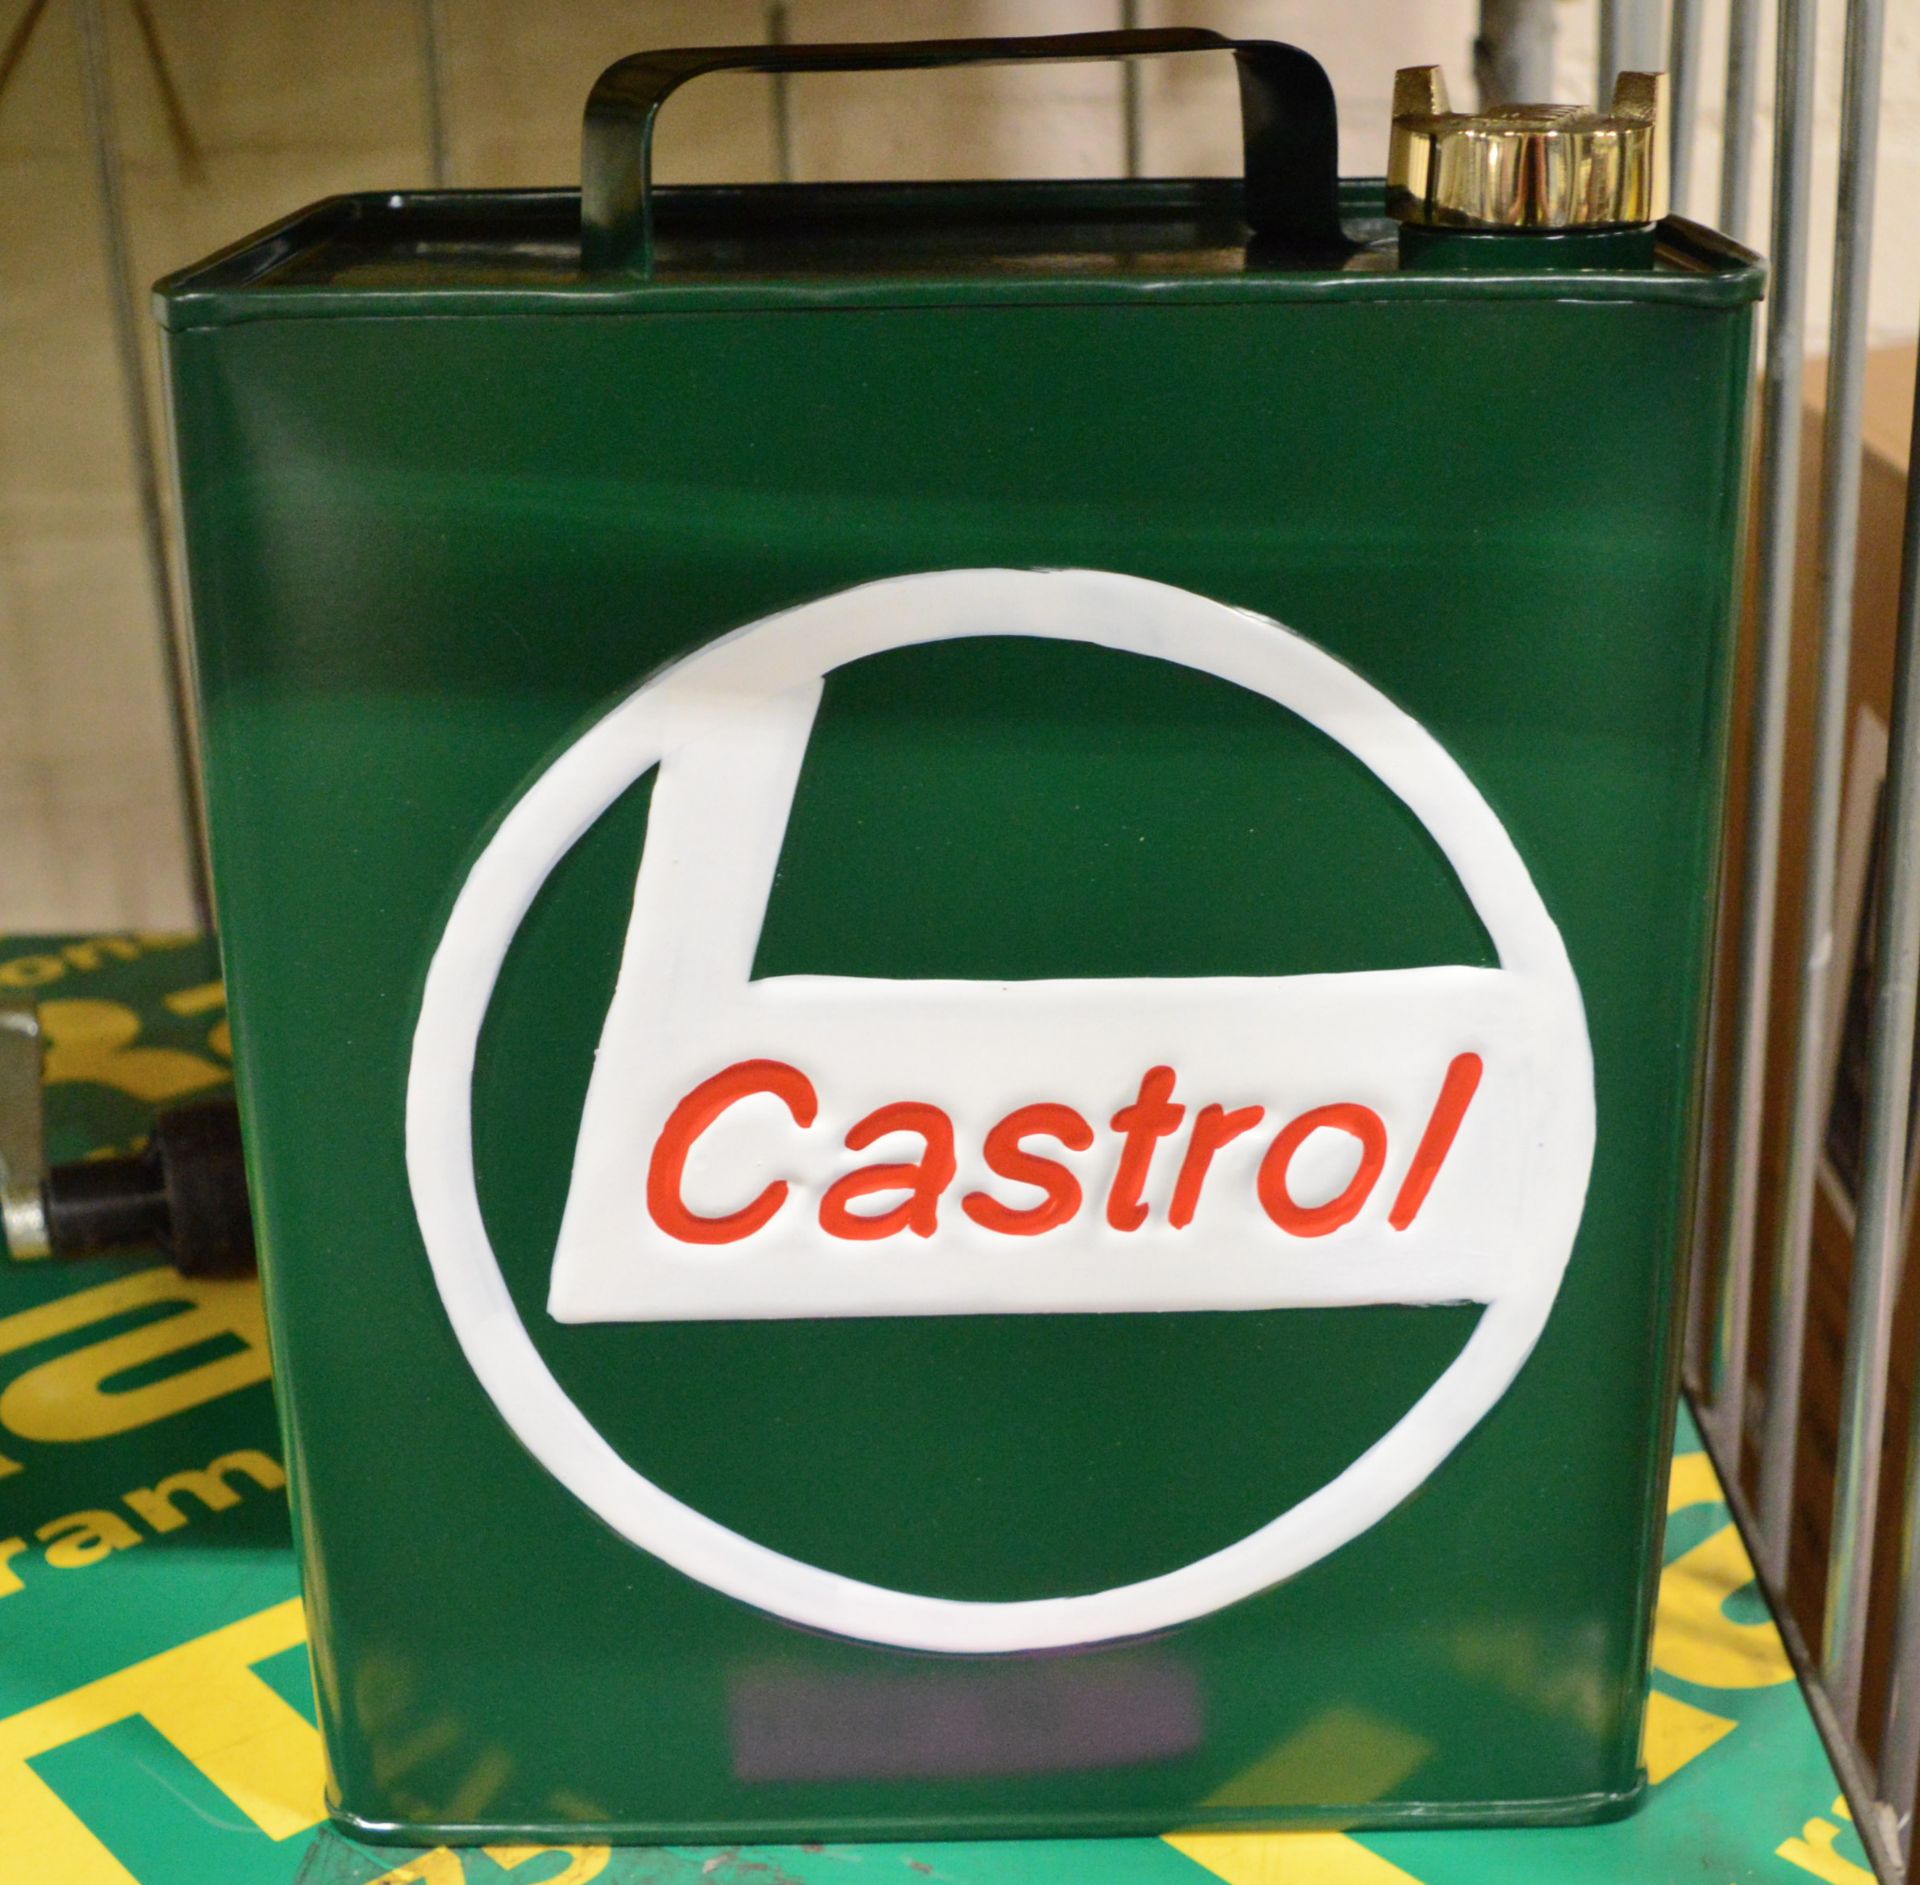 Castrol Reproduction Oil Can.